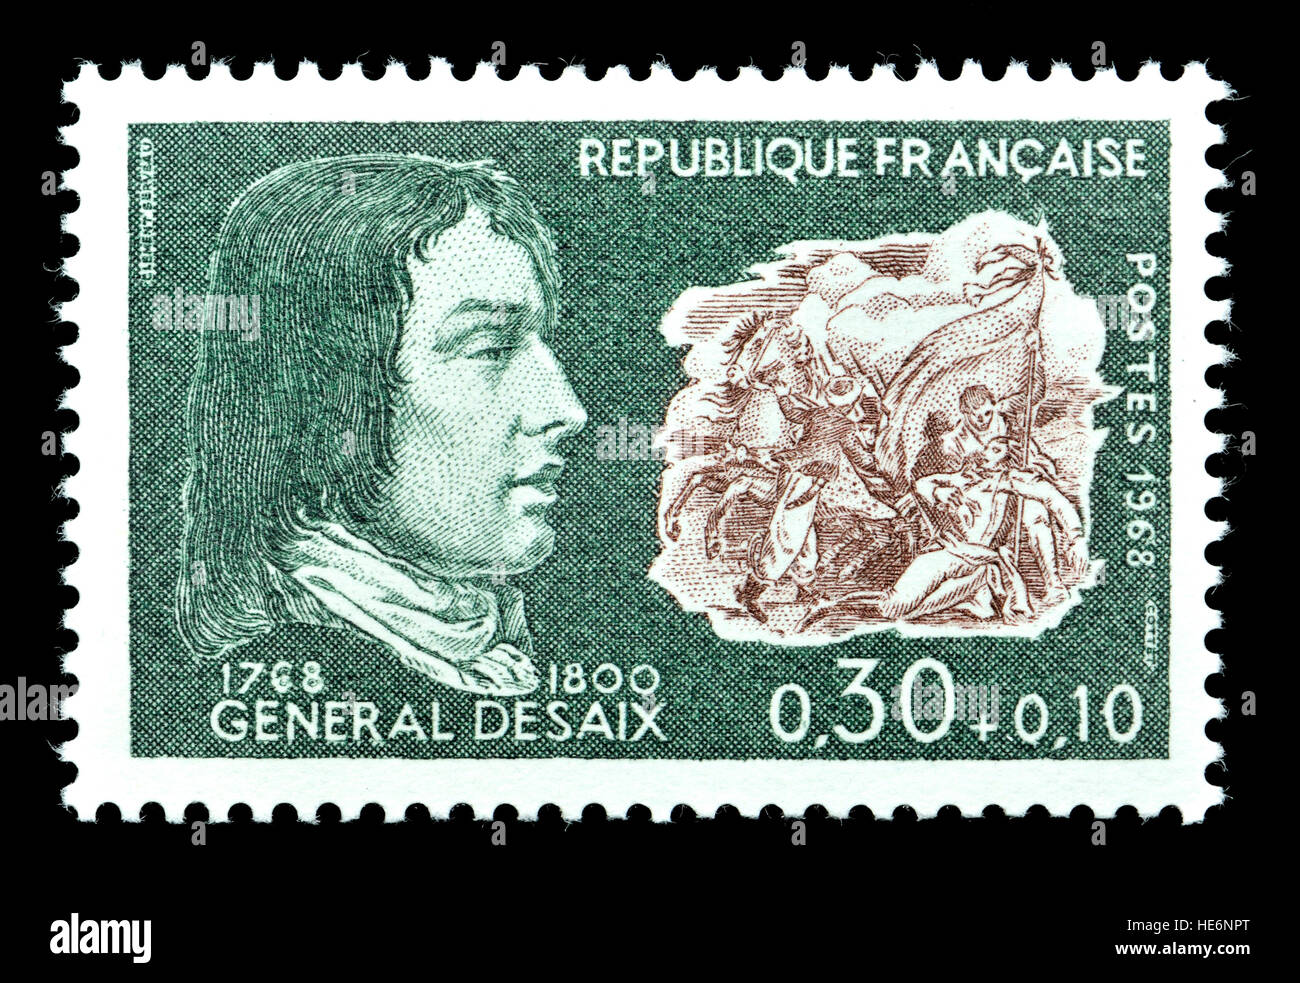 French postage stamp (1968) : Louis Charles Antoine Desaix (1768 – 1800) French general and military leader. From a painting by Andrea Appiani. Stock Photo